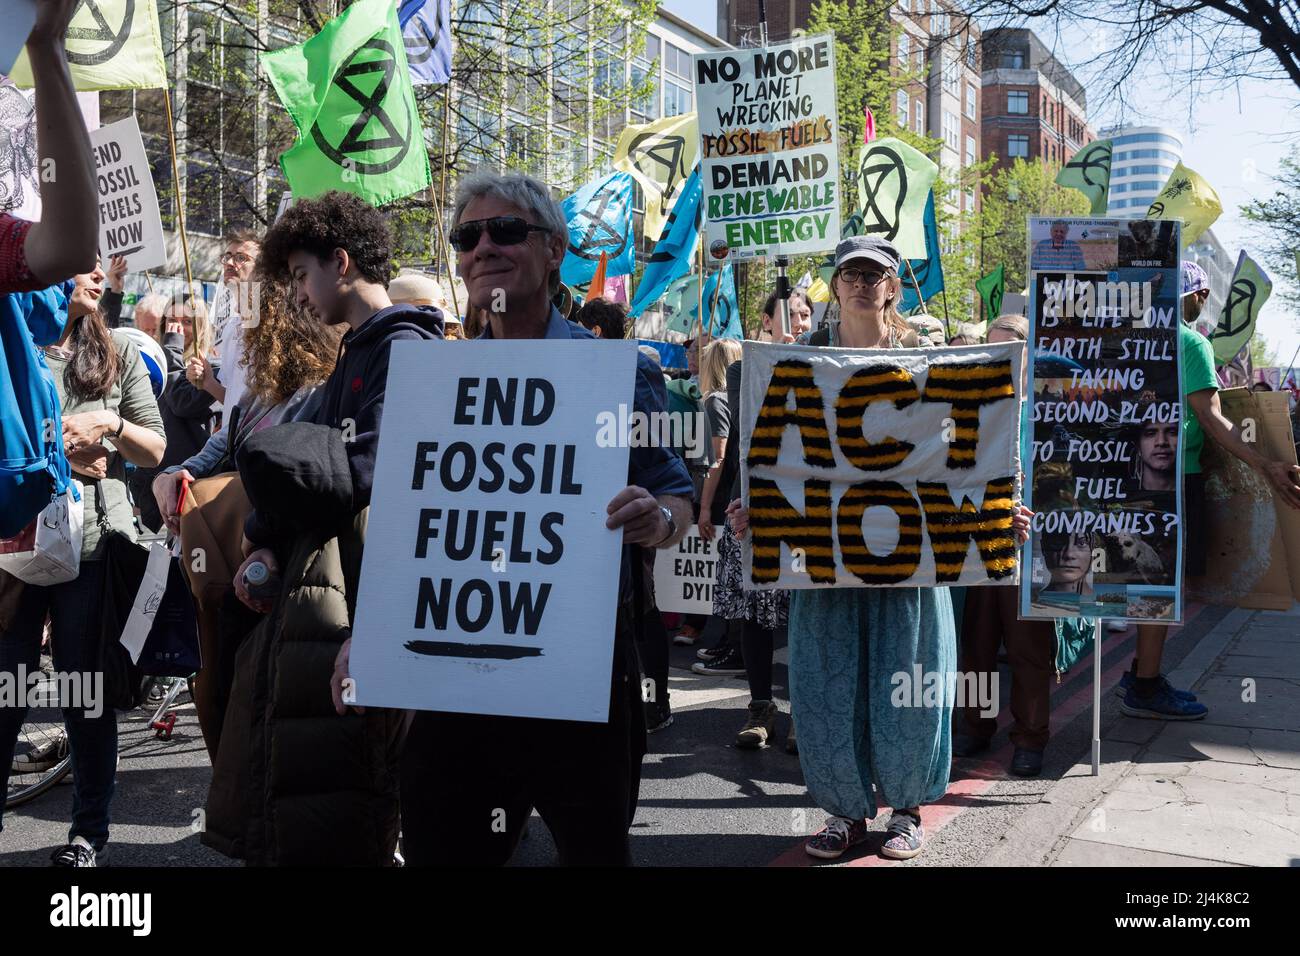 London, UK. 16th April, 2022. Activists from Extinction Rebellion march along Edgware Road on the eight day of protests and civil disobedience actions to demand an immediate stop to all new fossil fuel infrastructure by the British government amid climate crisis and ecological emergency. Credit: Wiktor Szymanowicz/Alamy Live News Stock Photo